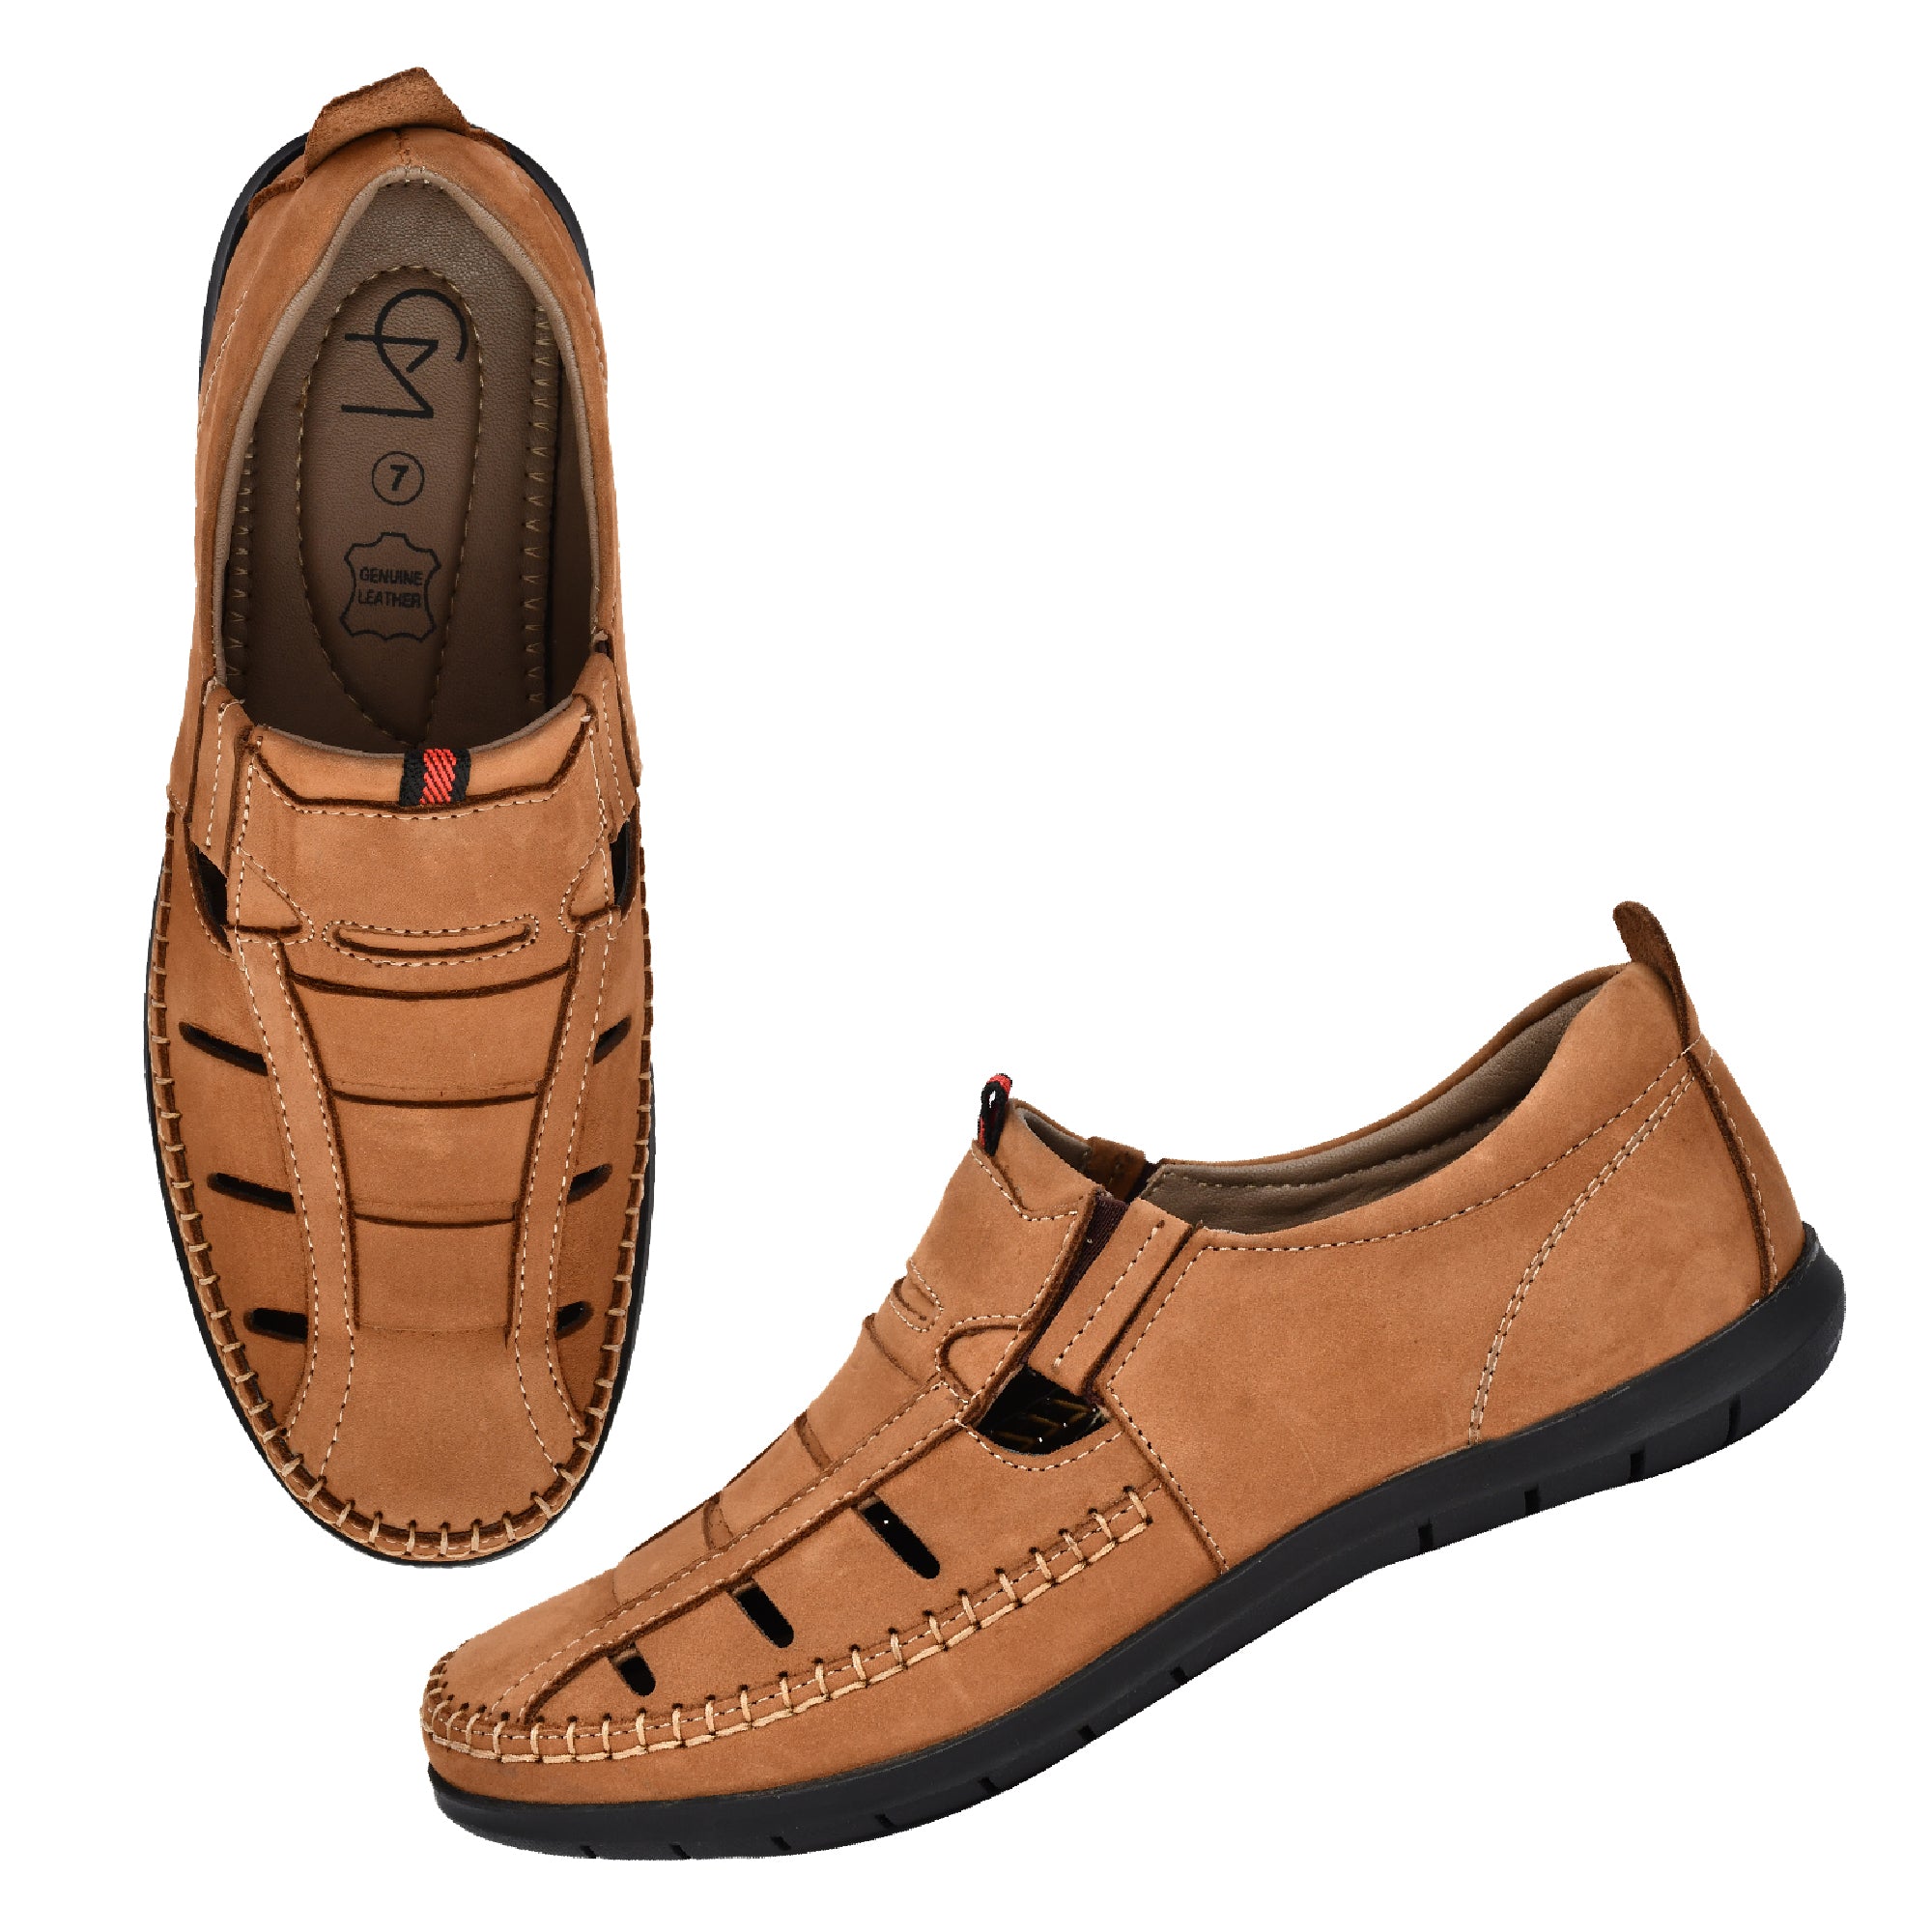 Casual New Buck Slip-On for Men's countrymaddox